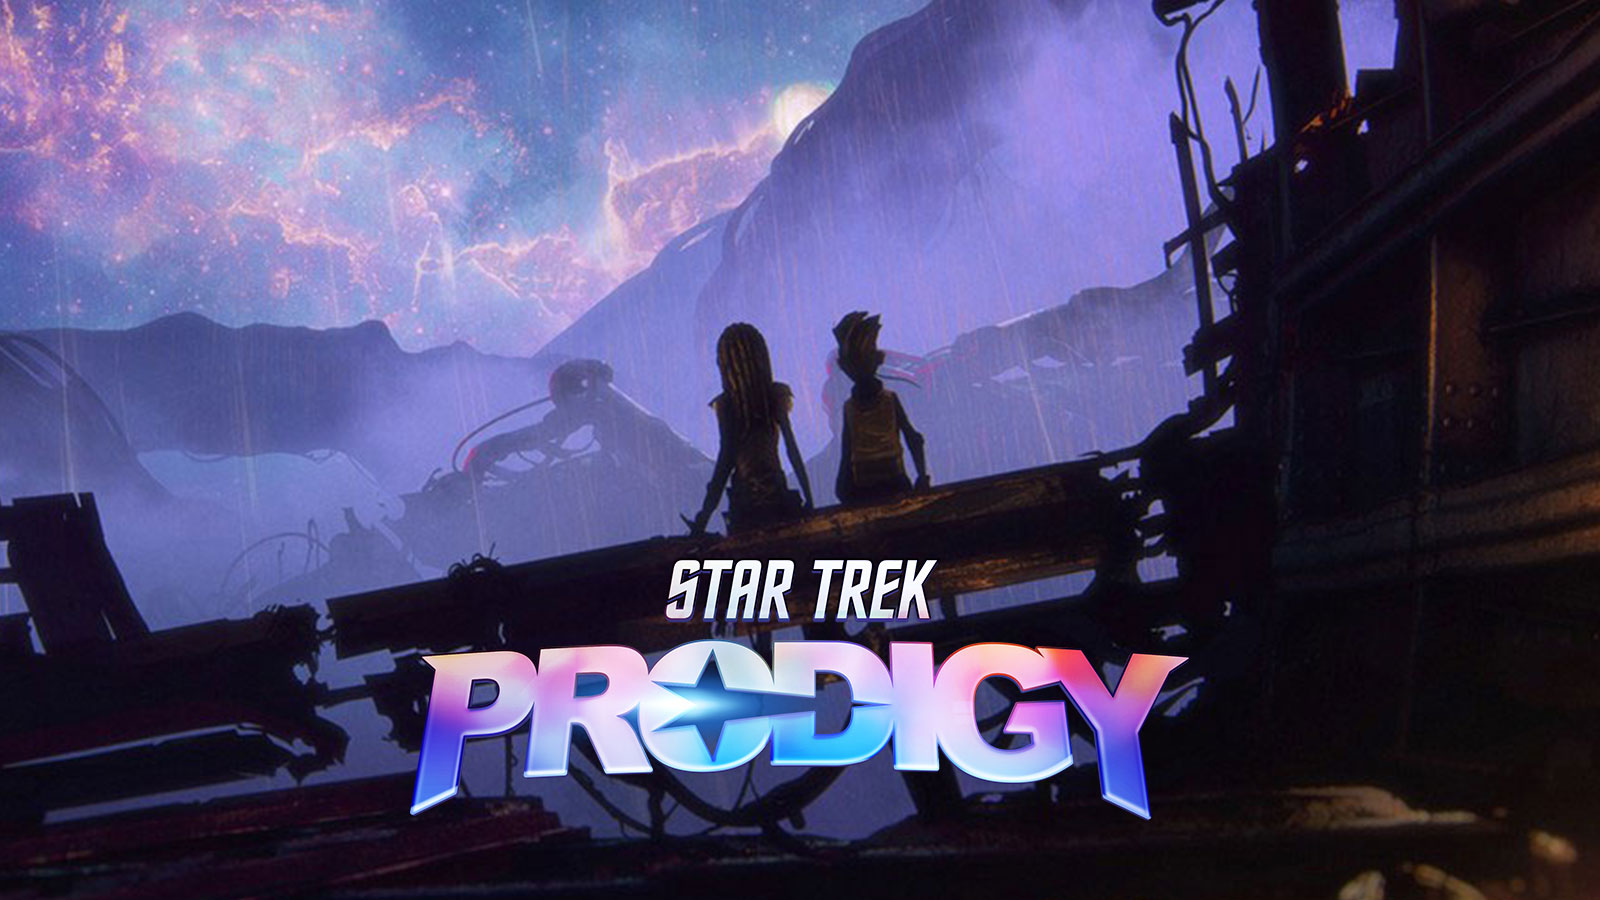 New Star Trek: Prodigy ‘Environmental’ Images Show Of The Alien Worlds Of The Upcoming Series